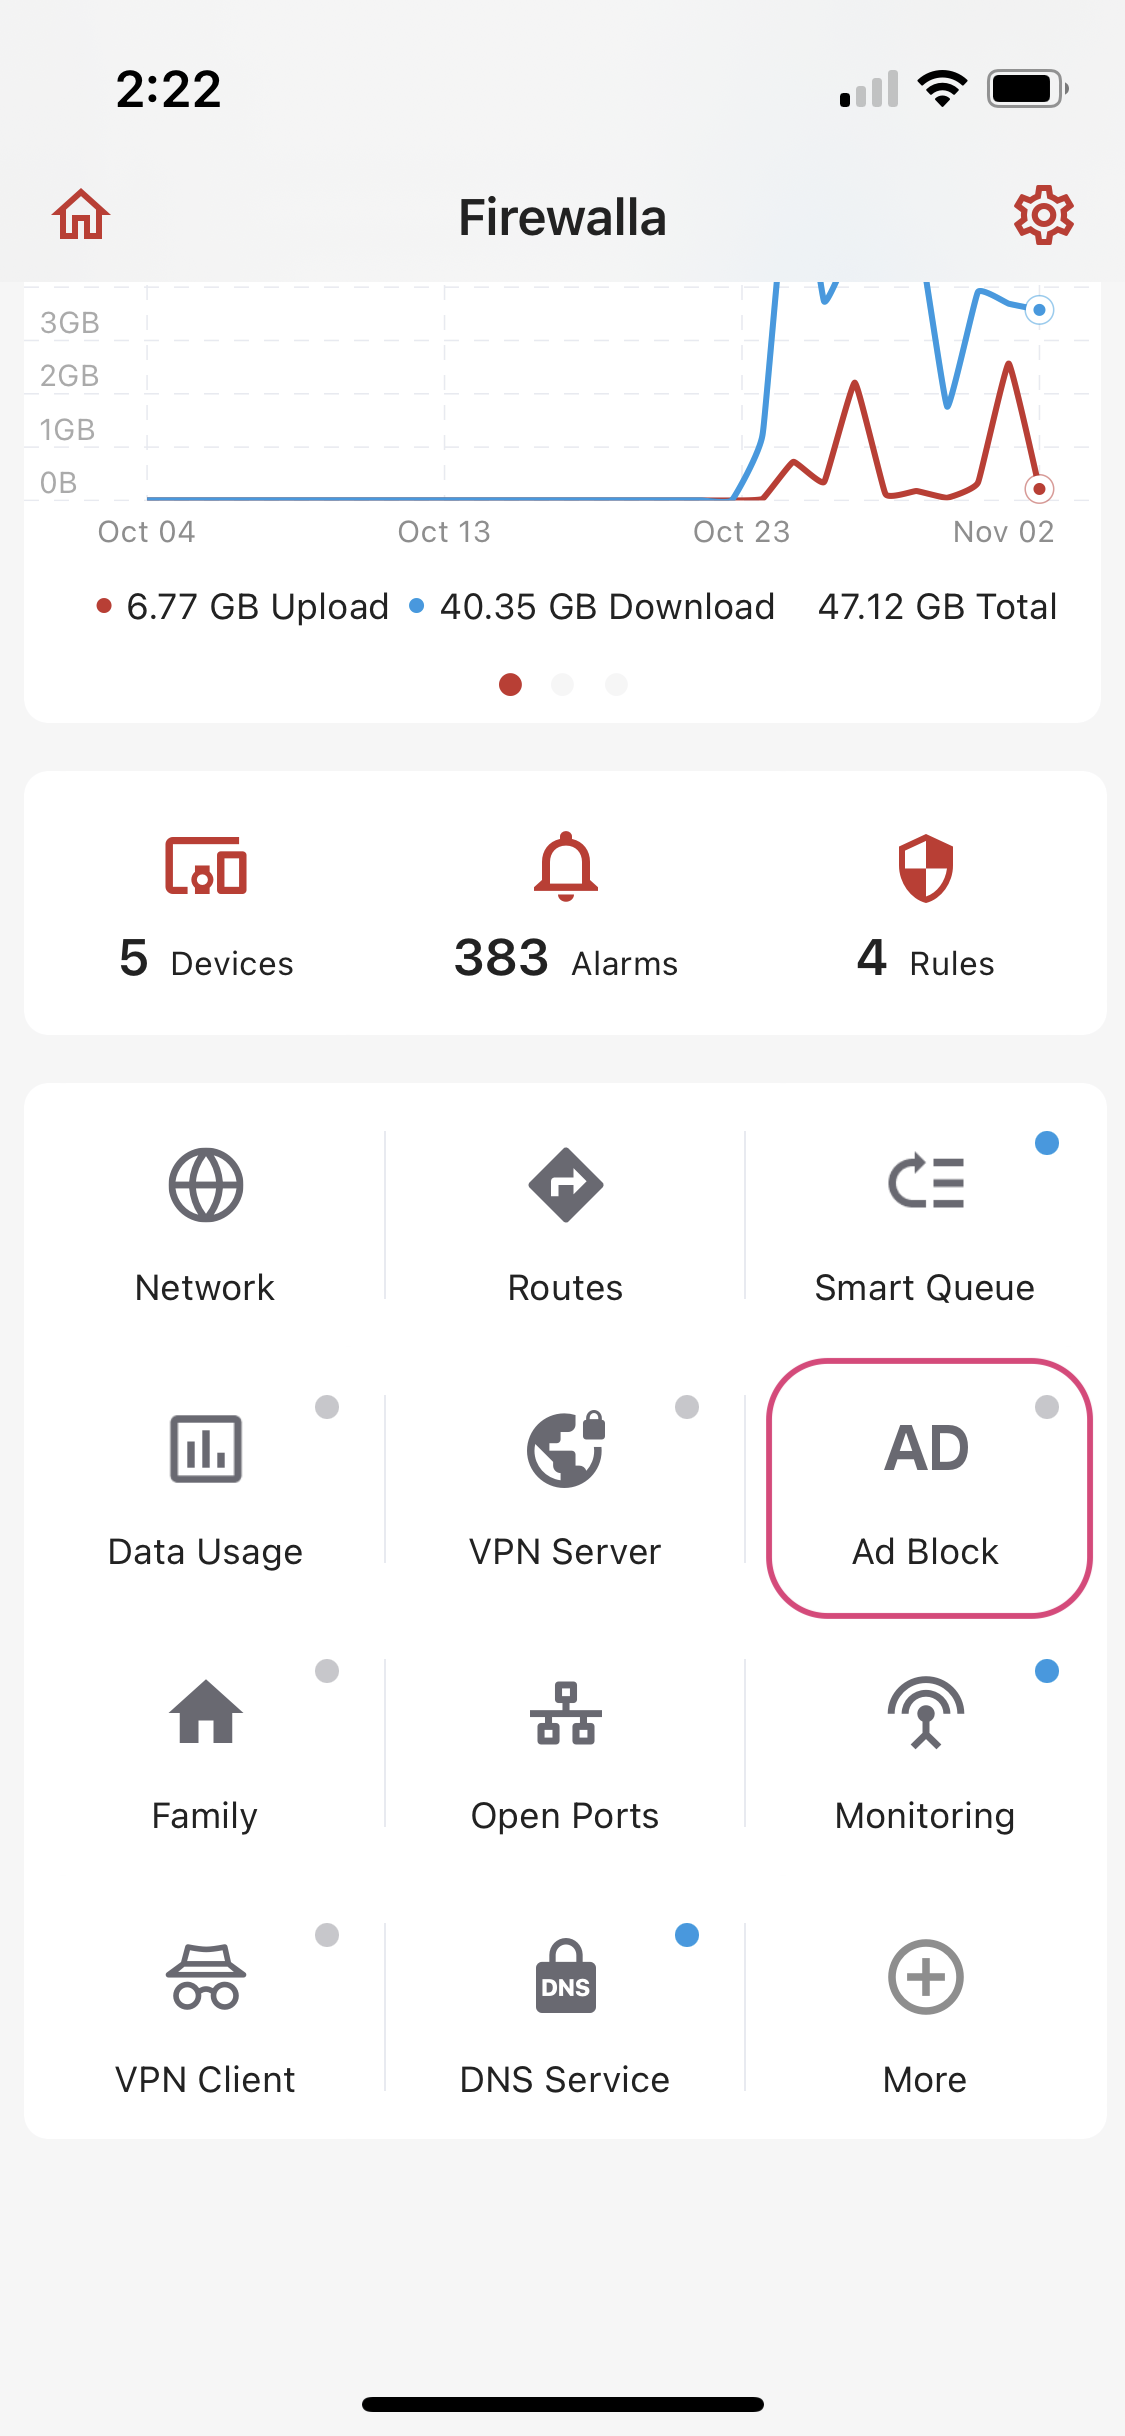 Setting up the Ad Block feature